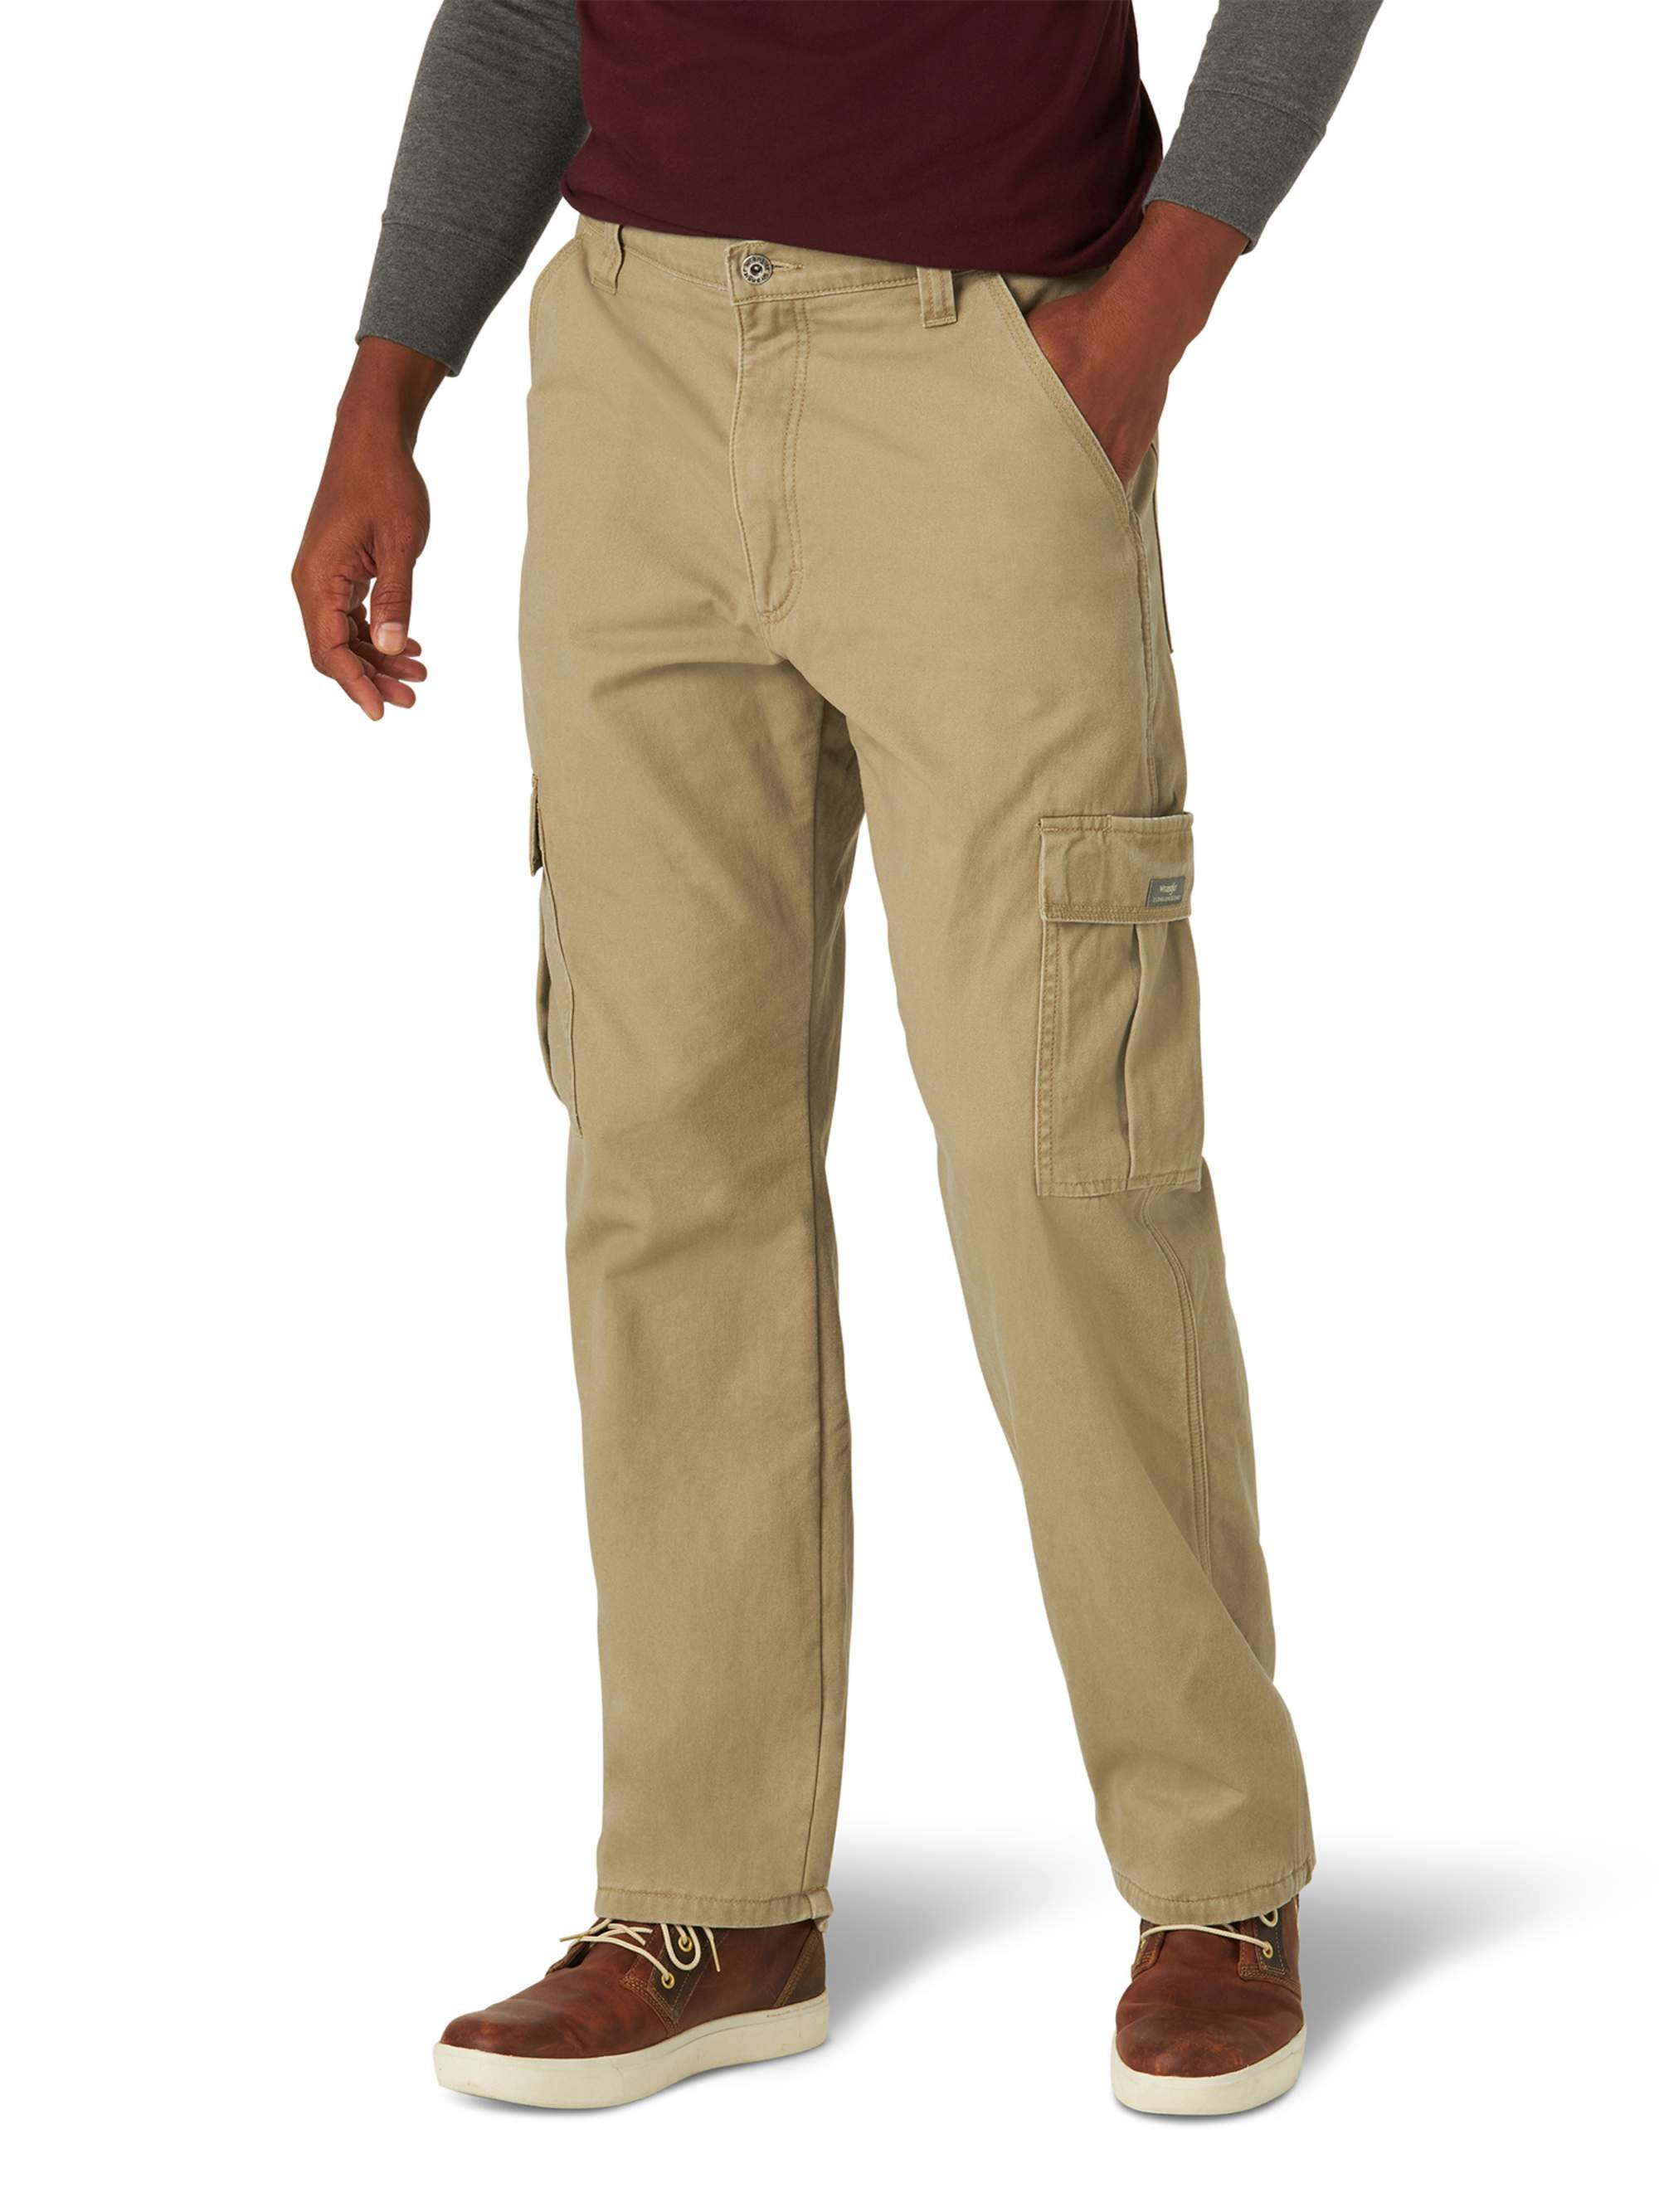 Wrangler Relaxed Fit Cargo Pant (Men's), 1 Count, 1 Pack 